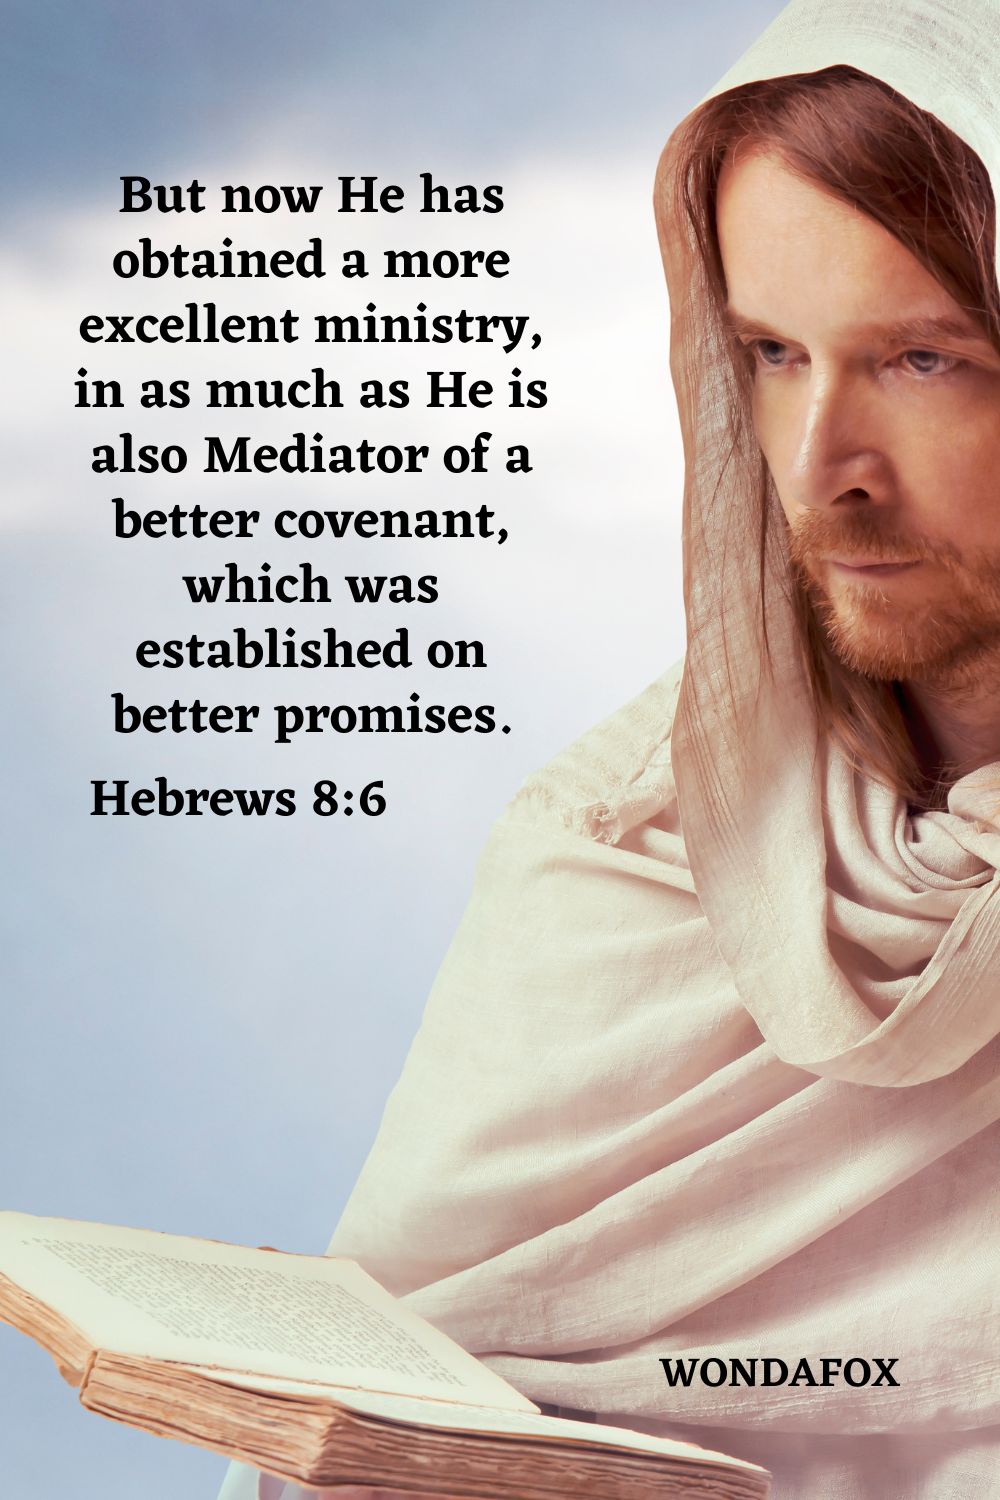 But now He has obtained a more excellent ministry, in as much as He is also Mediator of a better covenant, which was established on better promises.
Hebrews 8:6